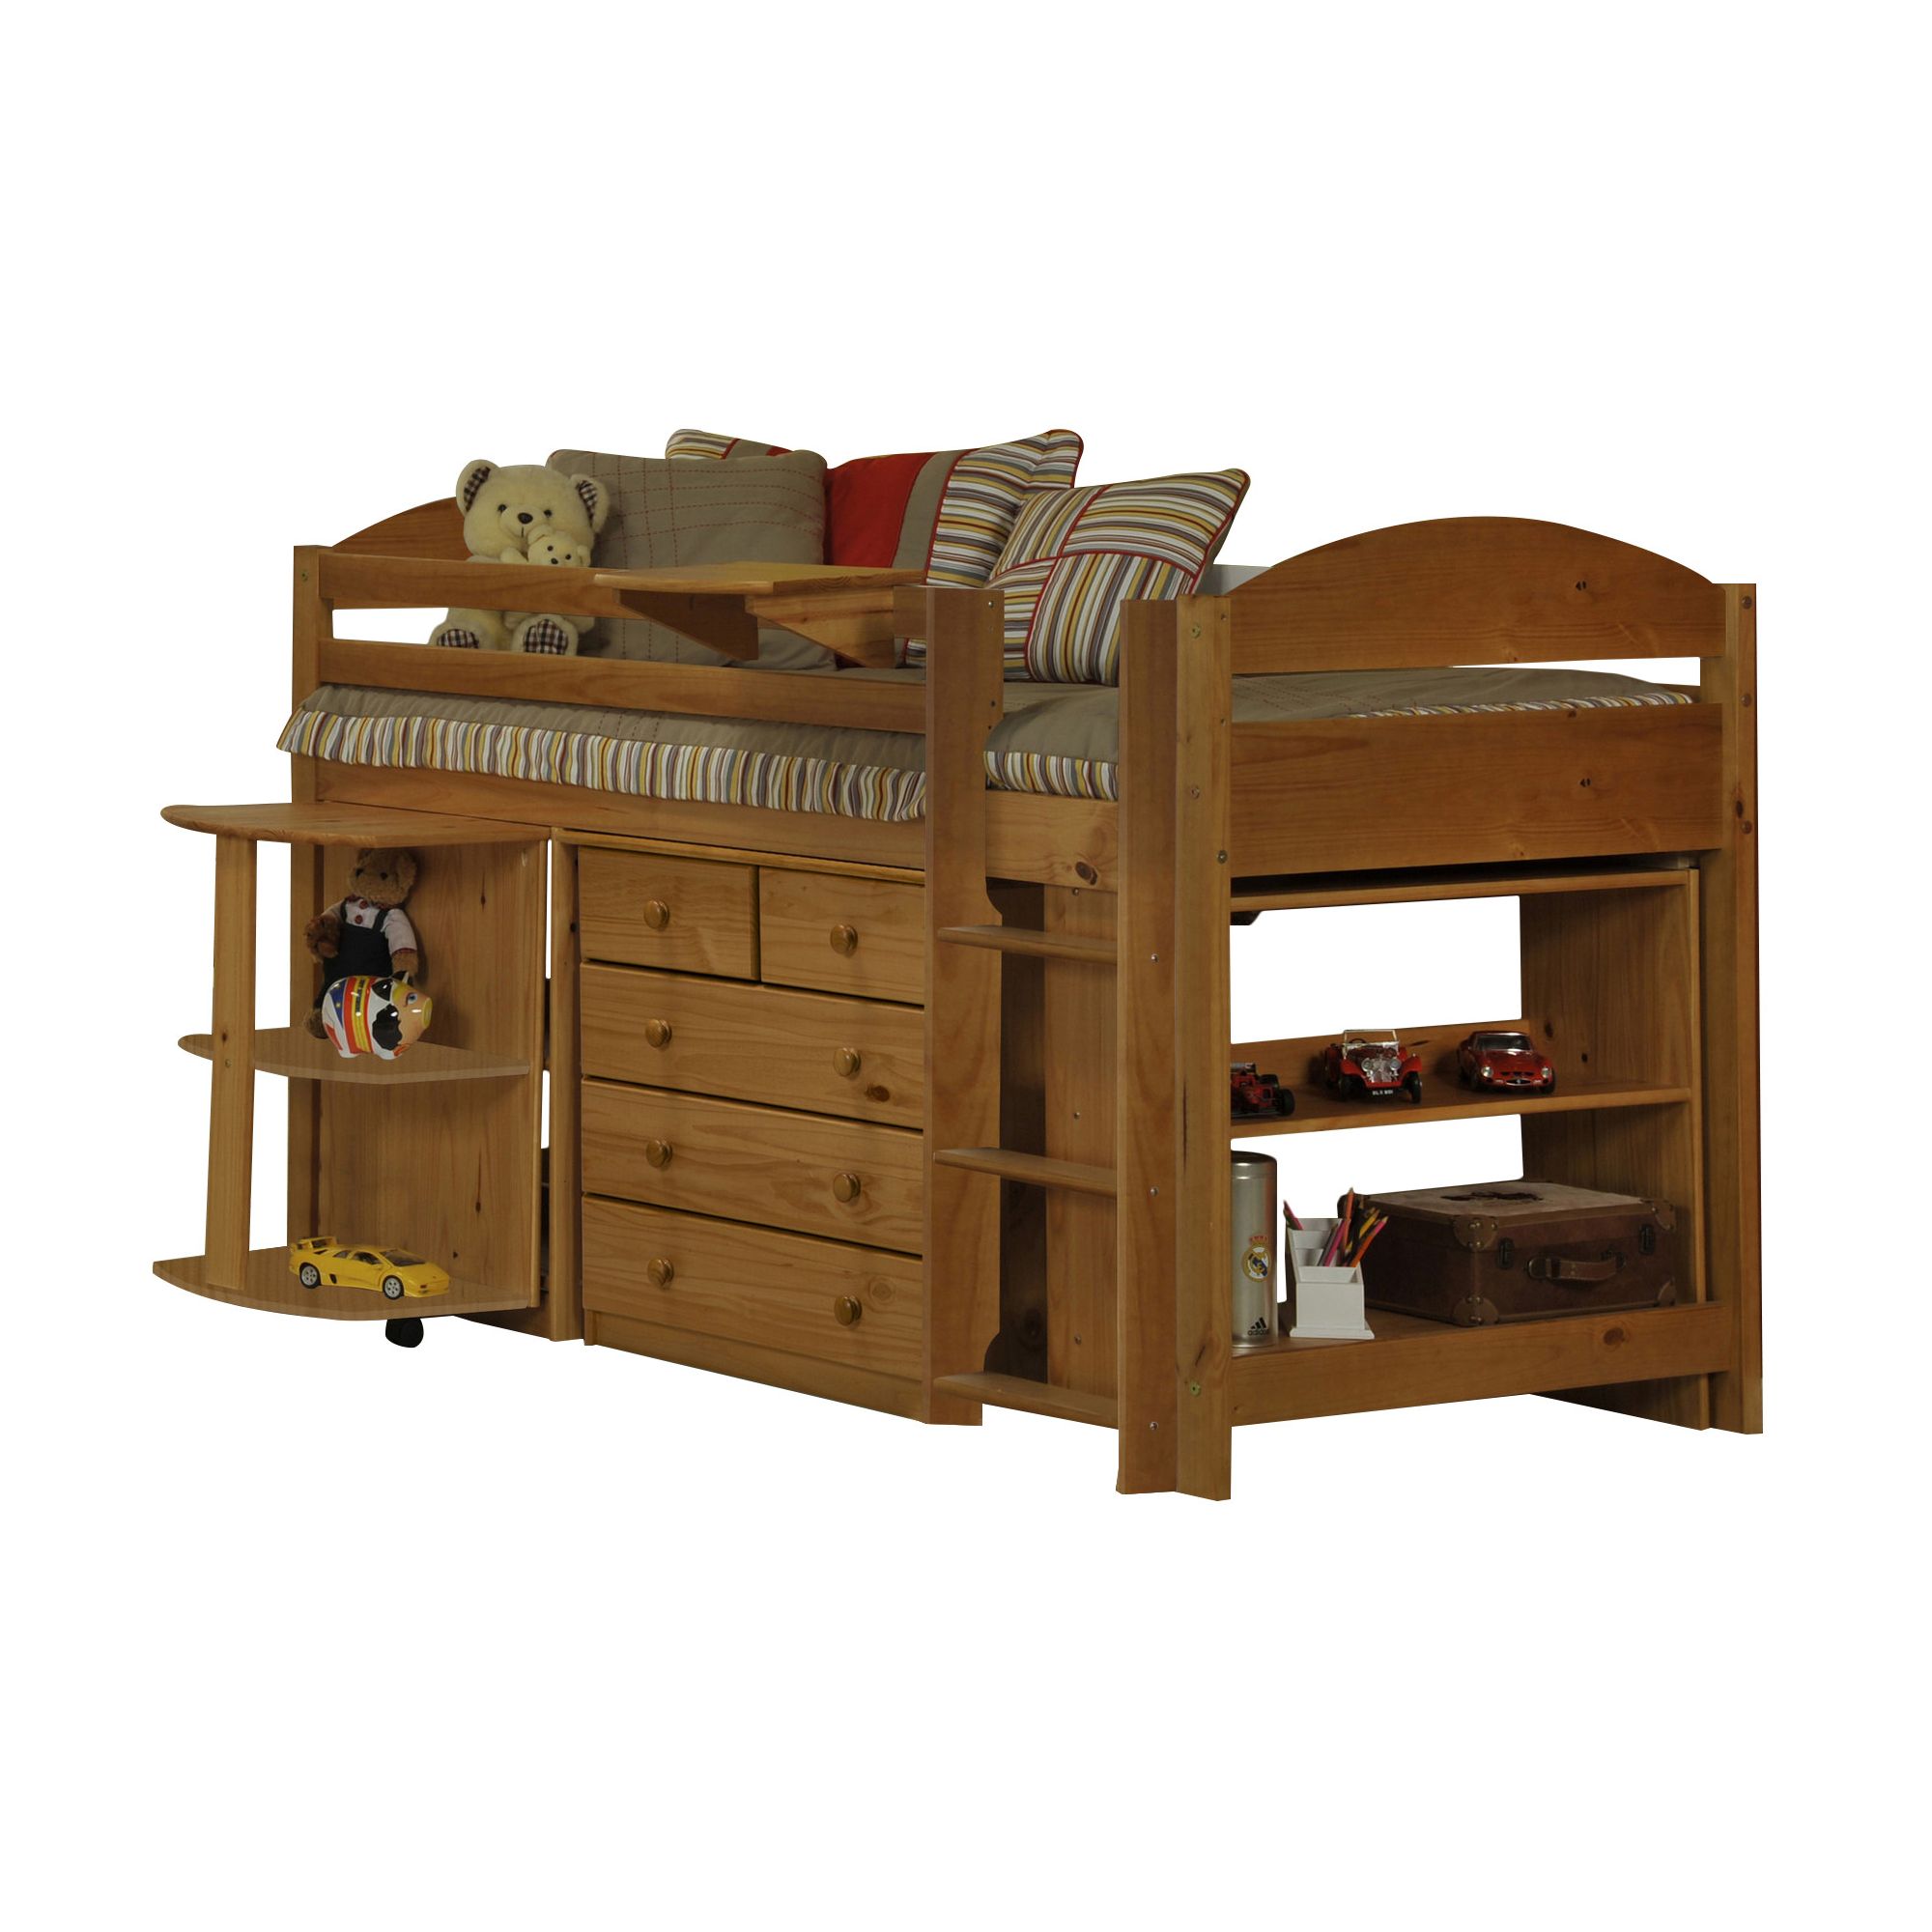 Verona Maximus Midsleeper with Underbed Furniture - Antique at Tescos Direct